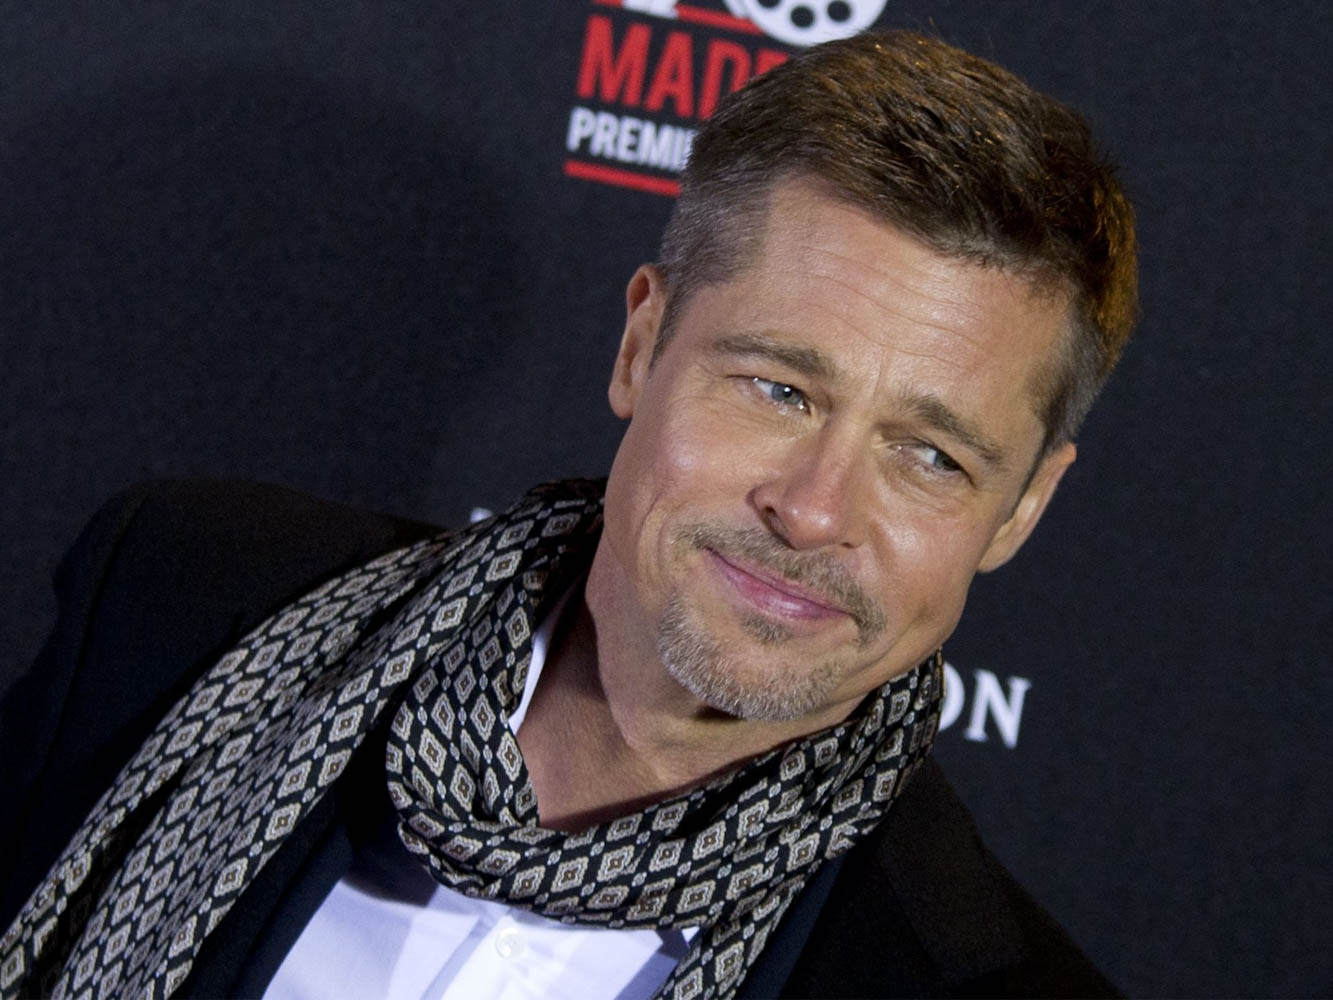 Brad Pitt and 'Game of Thrones' Natalie Dormer Have the Same Haircut?! Pics